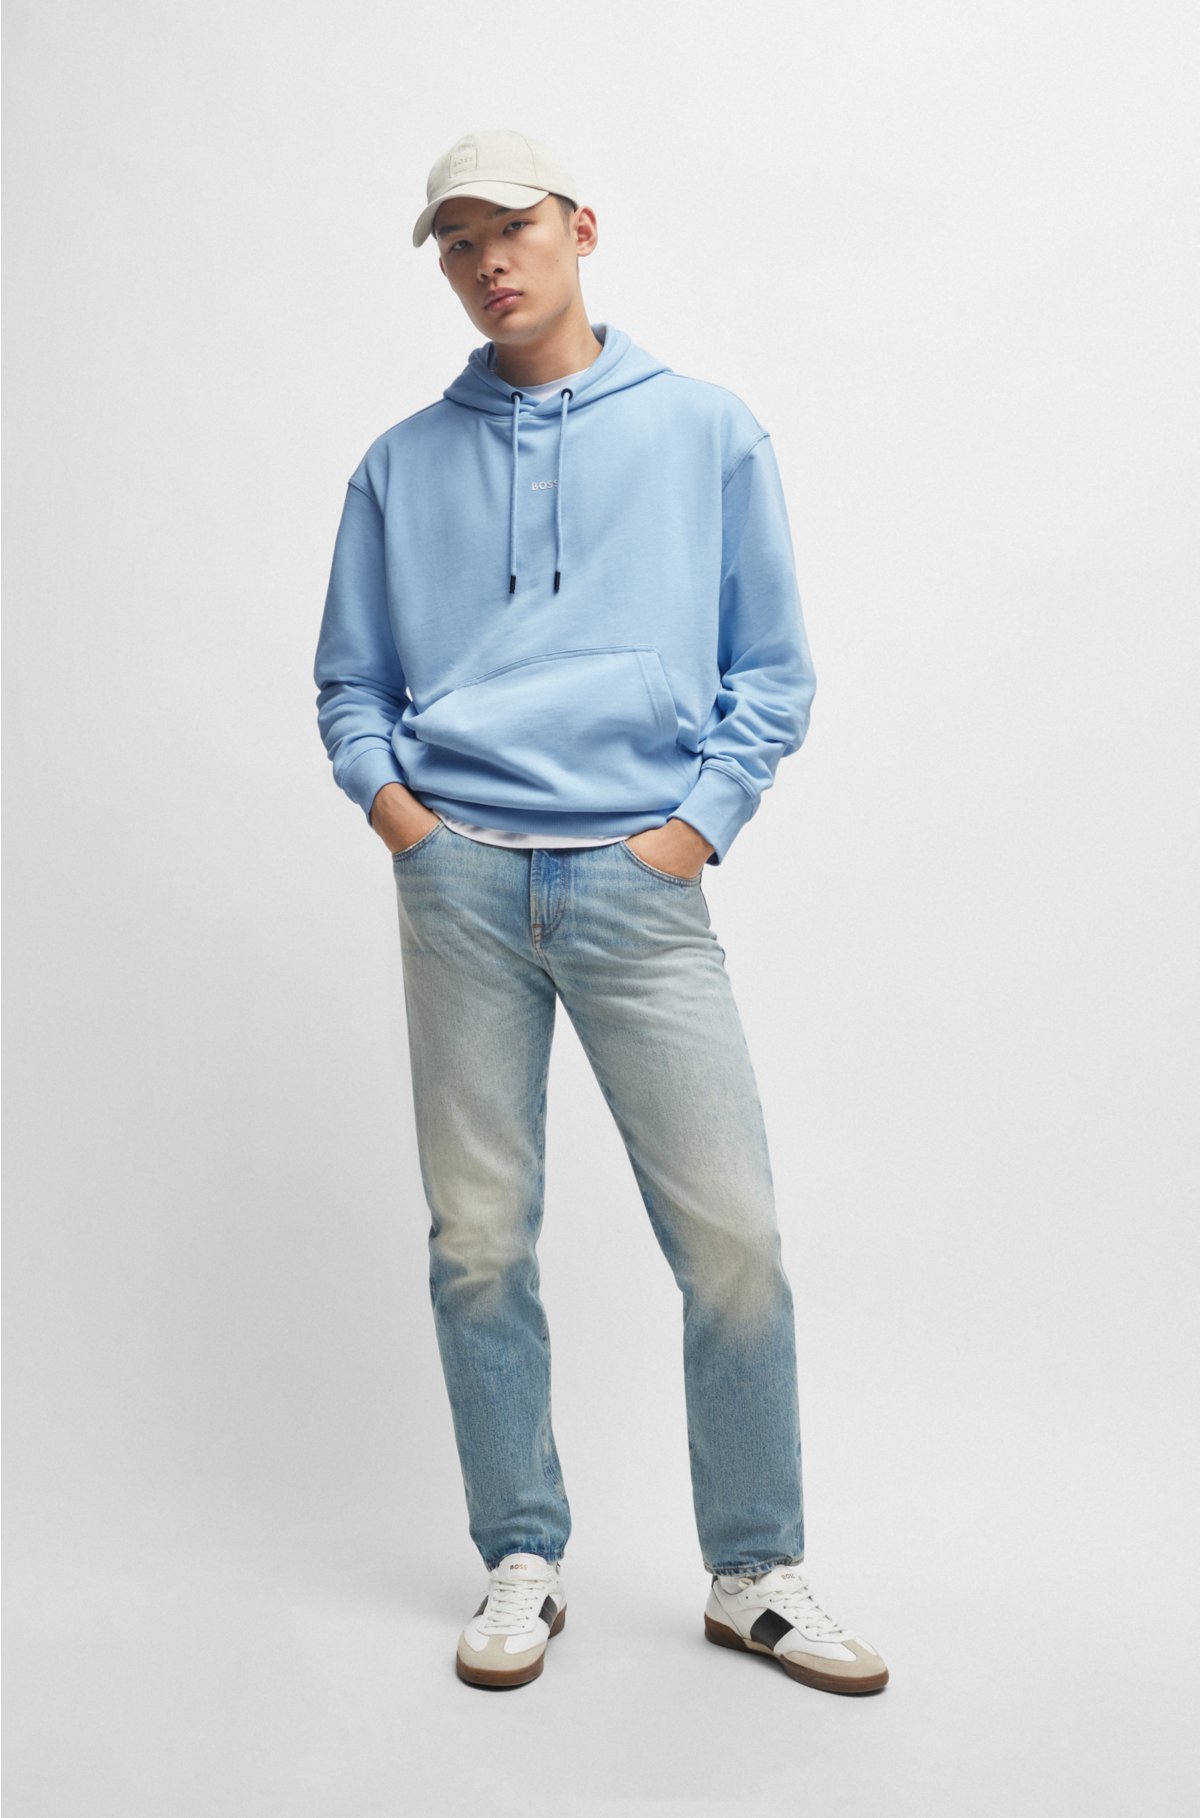 Cotton-terry hoodie with contrast logo, Light Blue